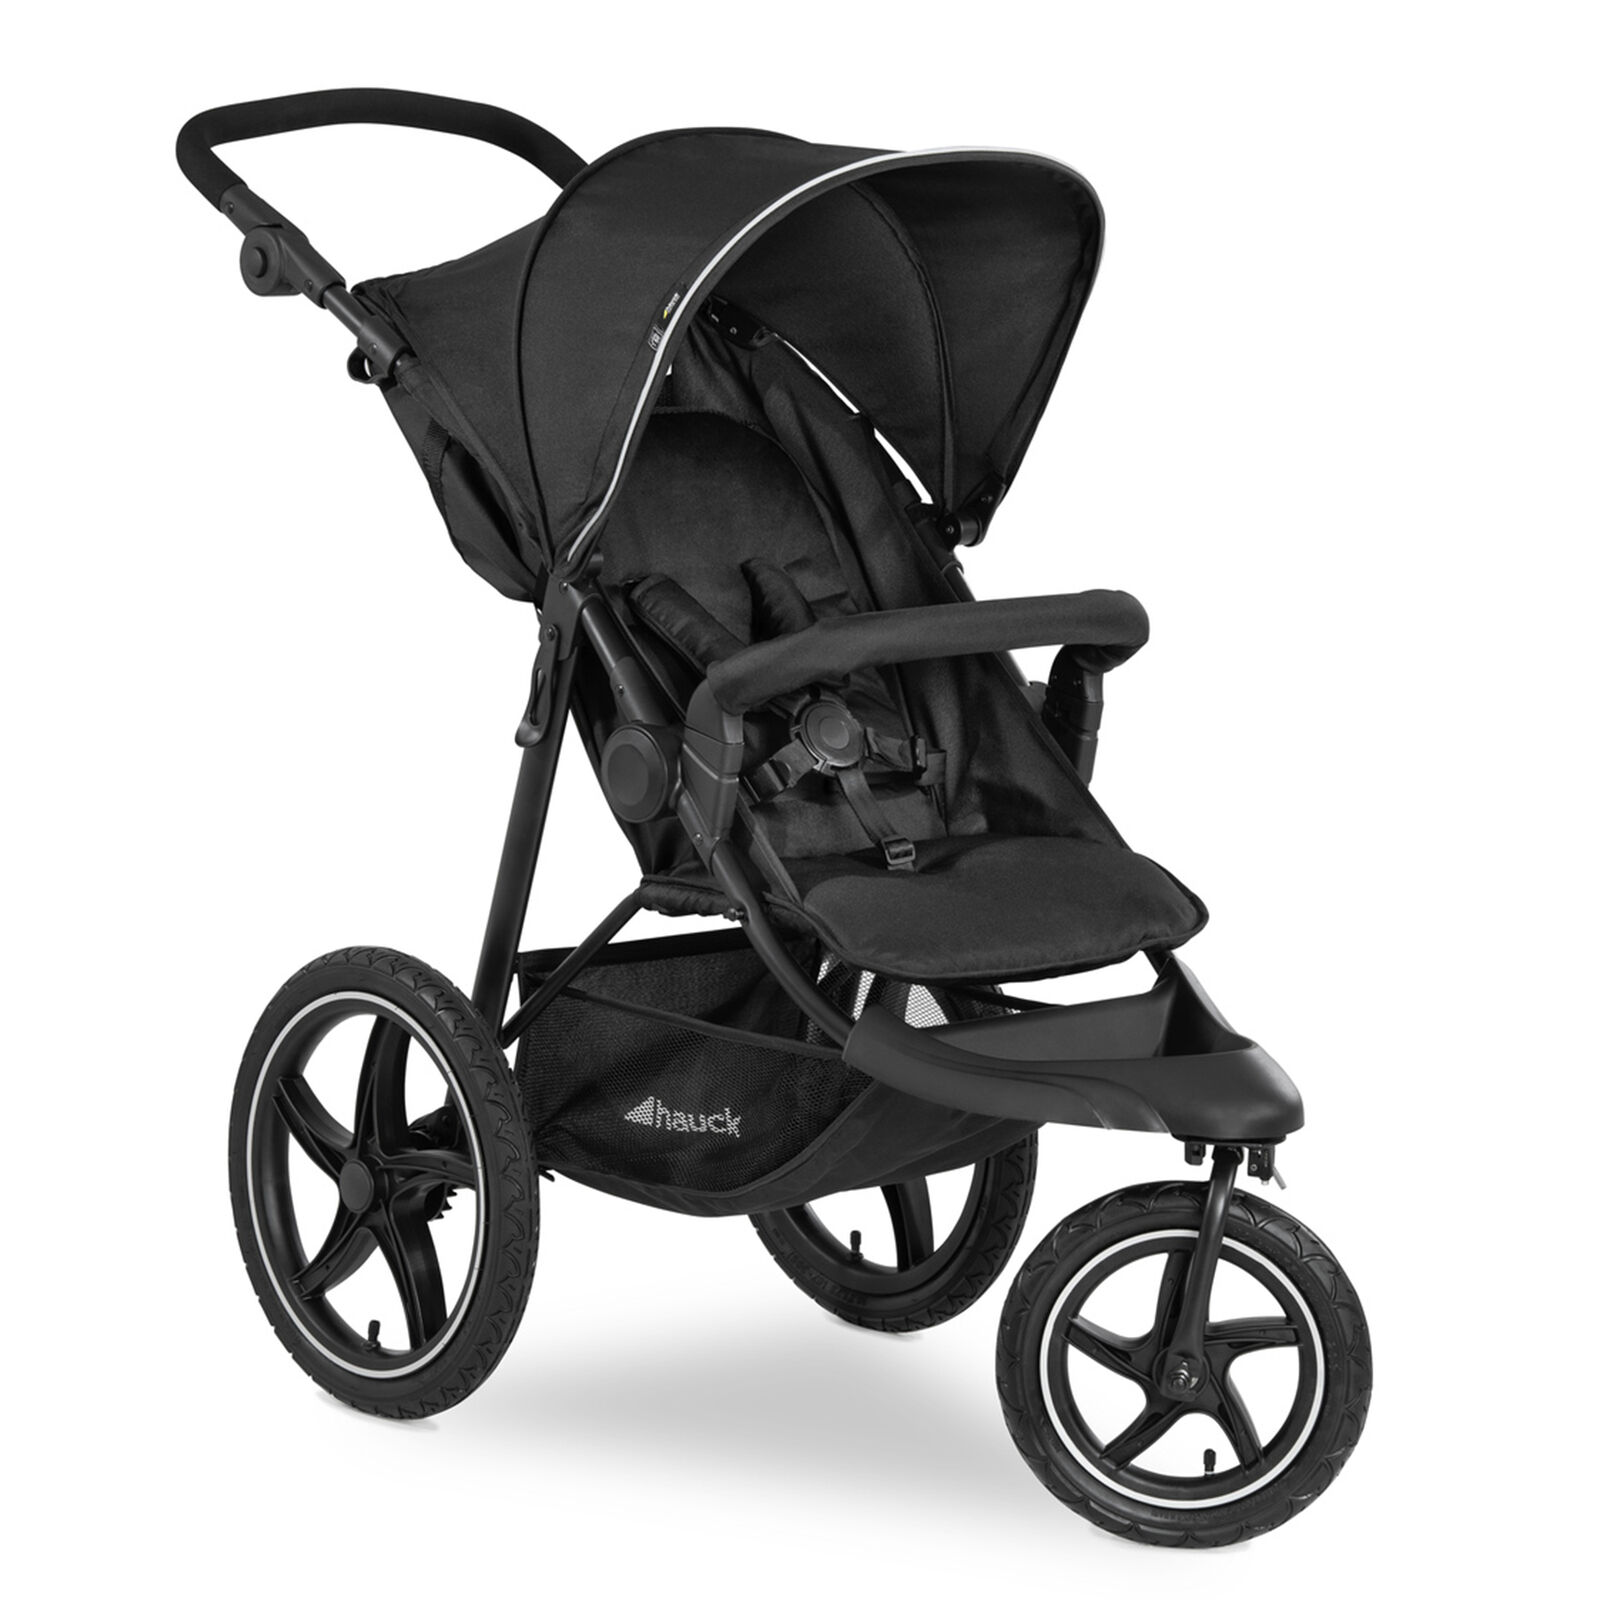 hauck Runner 2 Compact Foldable Tricycle Jogger Buggy Stroller Pushchair $141 + Free Shipping